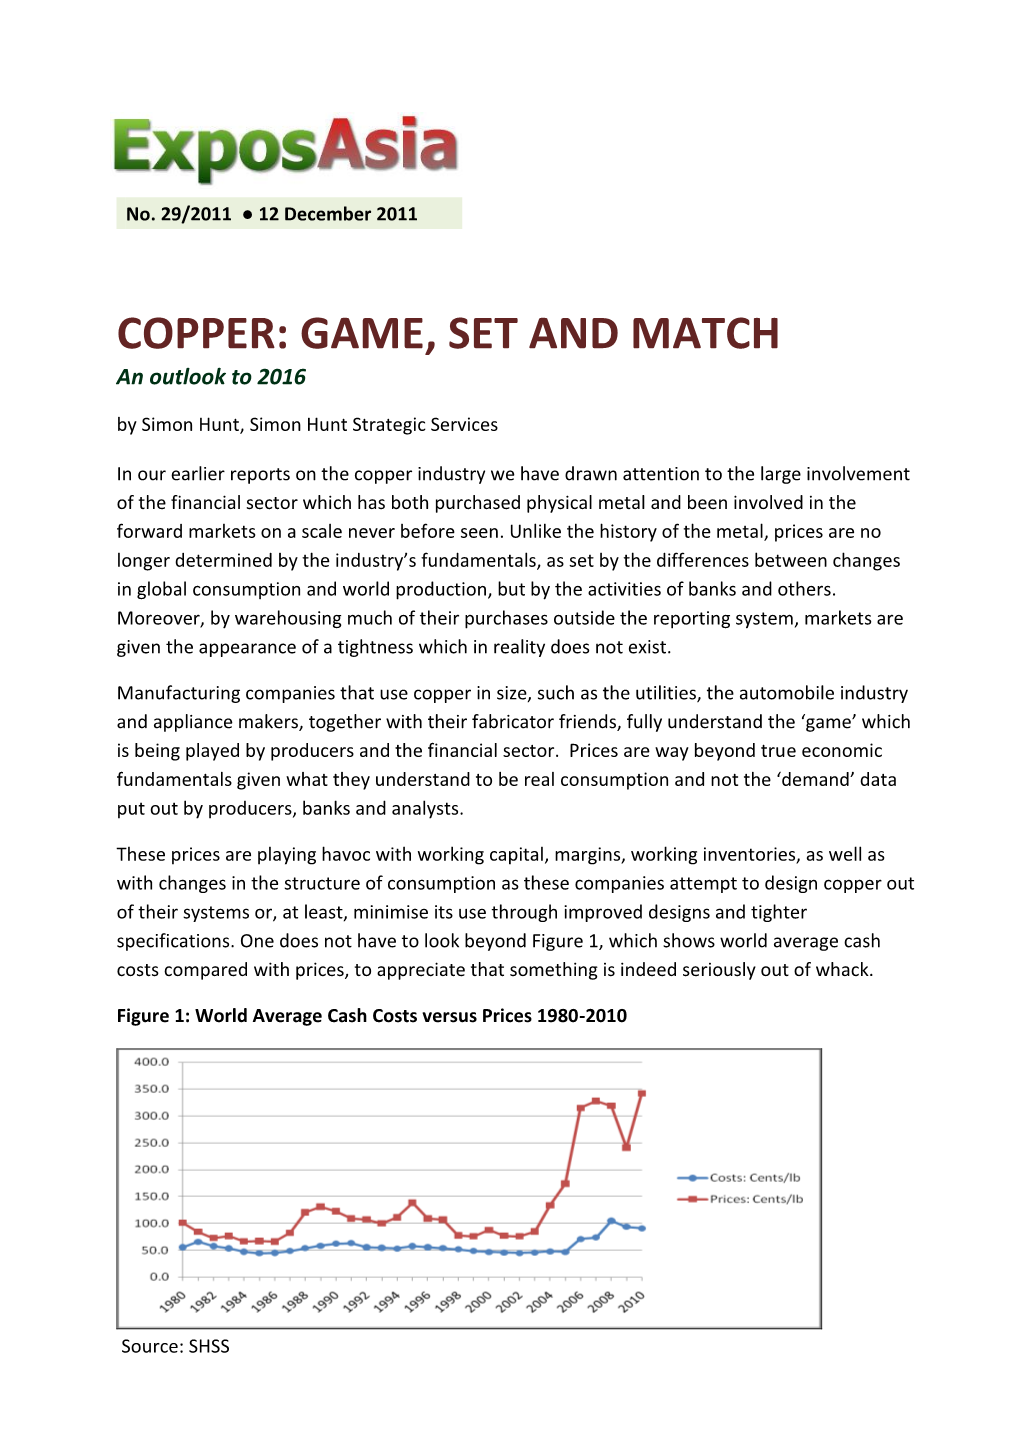 COPPER: GAME, SET and MATCH an Outlook to 2016 by Simon Hunt, Simon Hunt Strategic Services